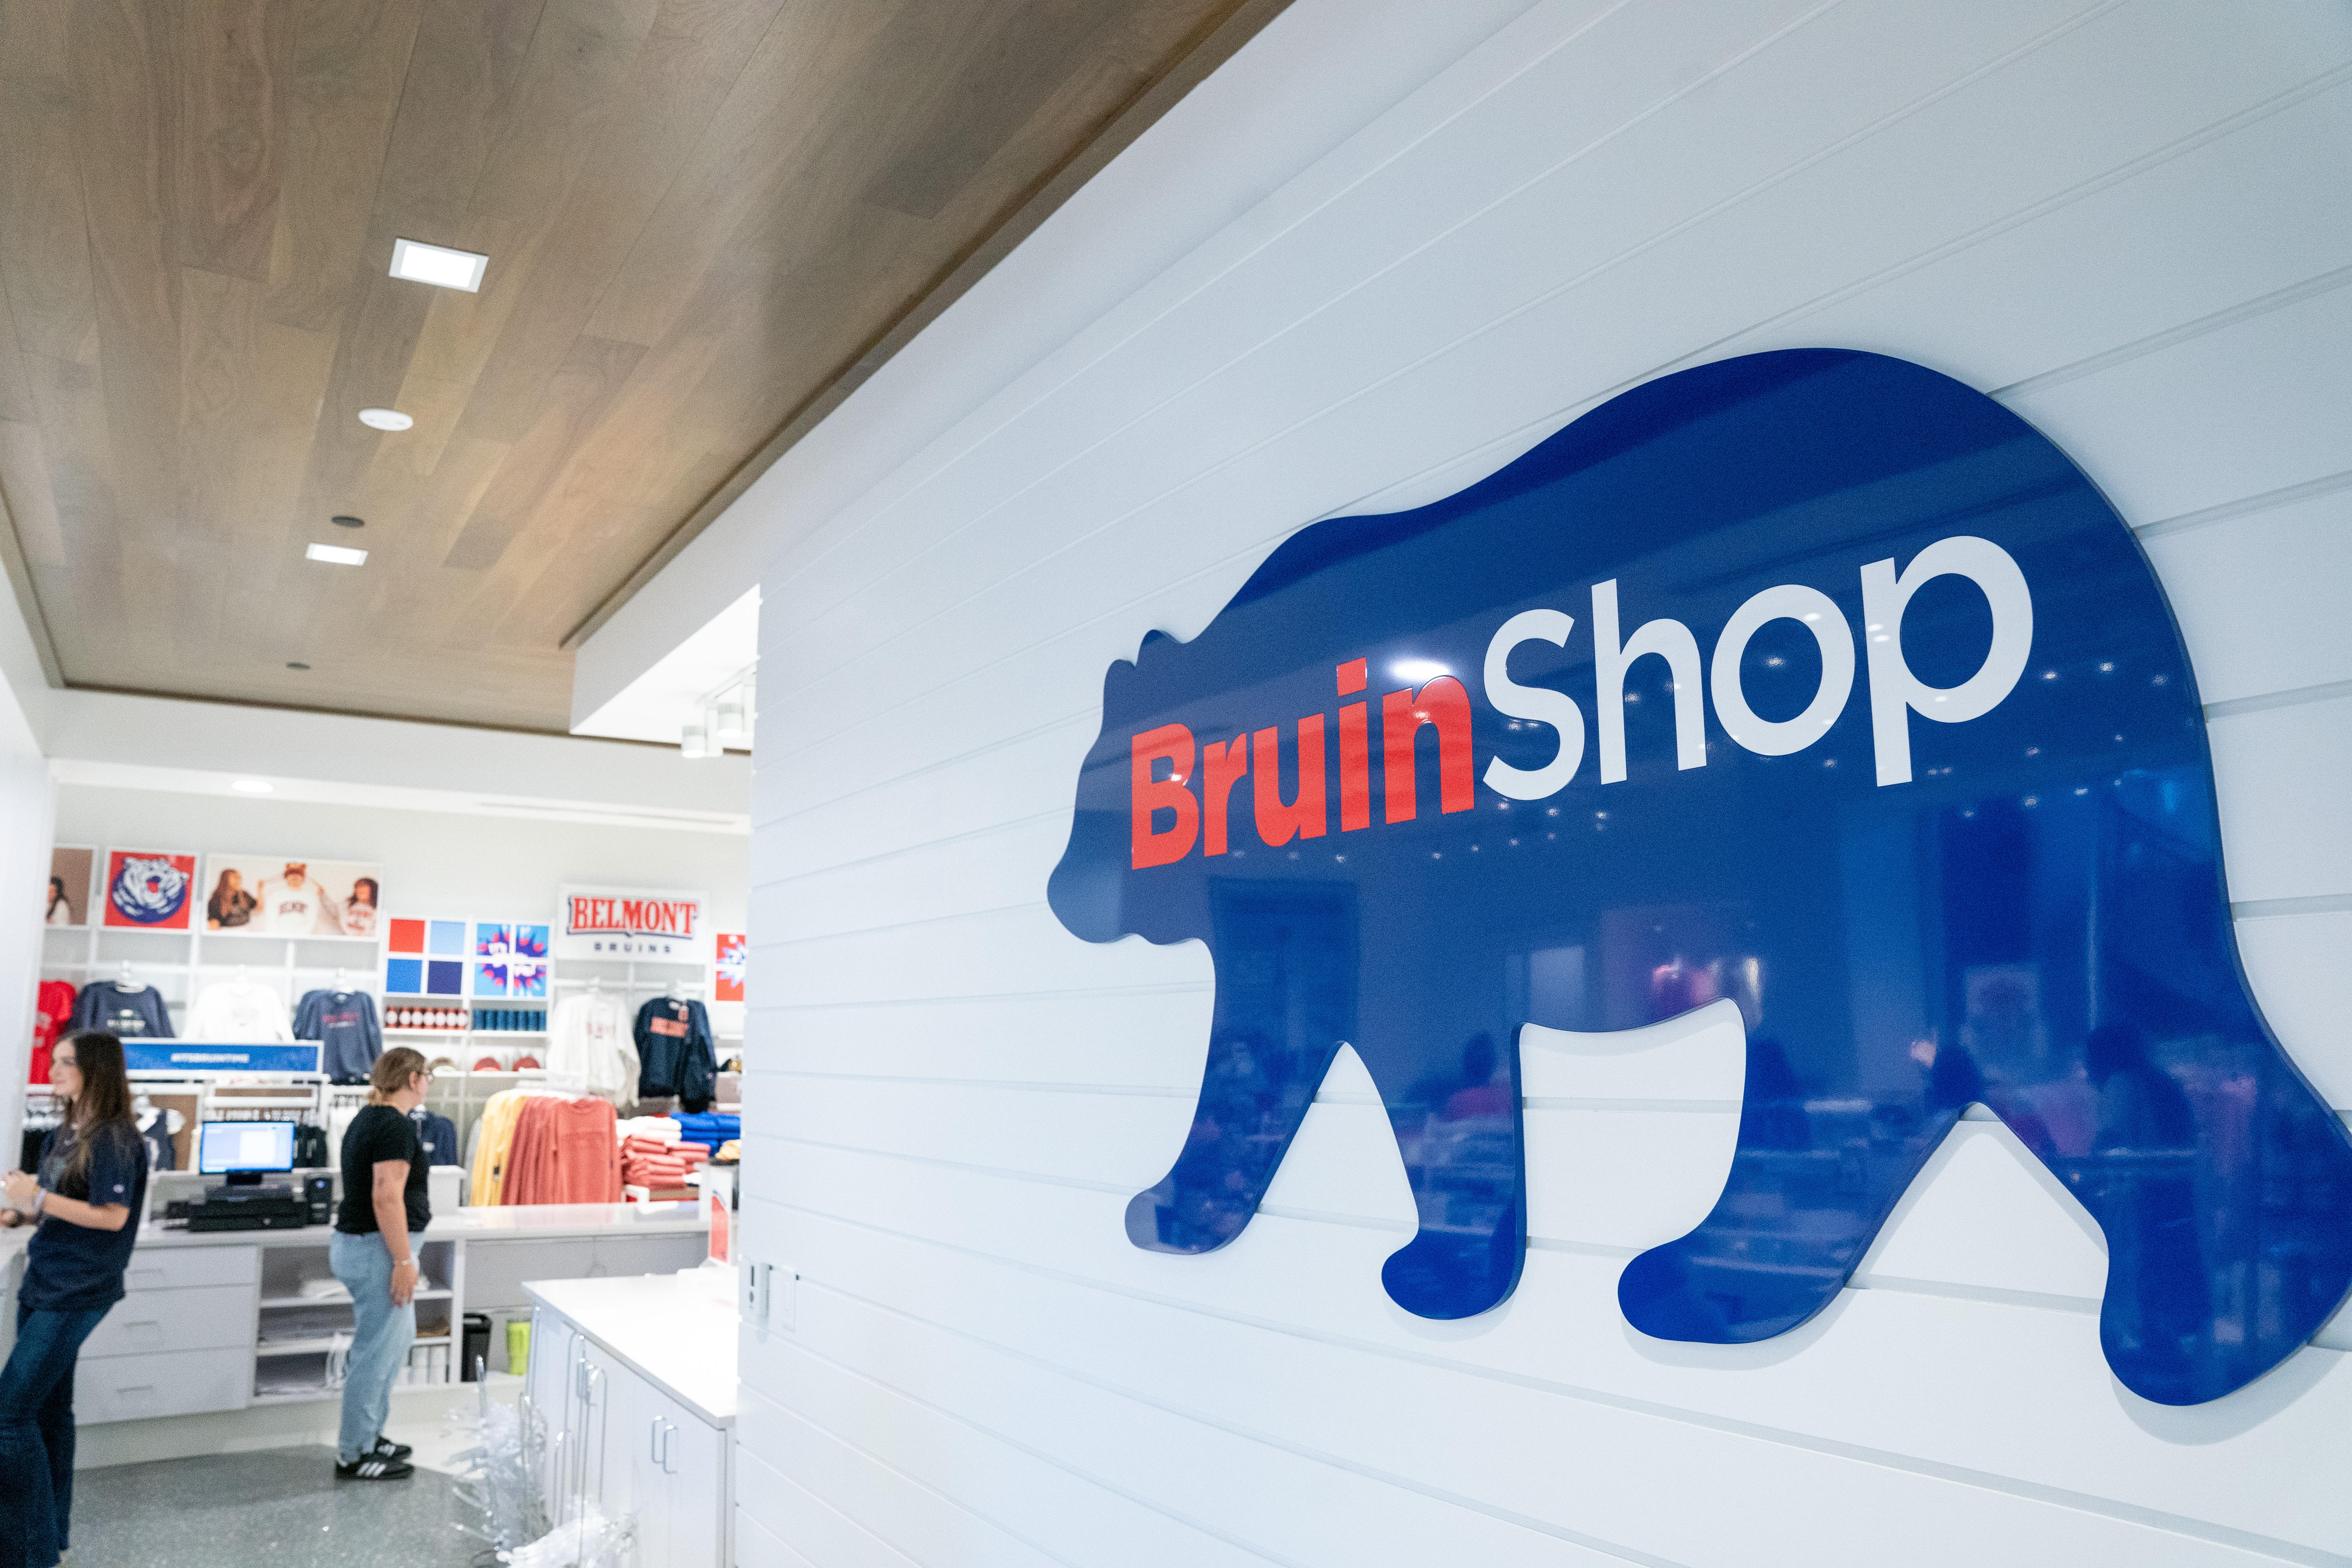 Image of The BruinShop logo on a wall, a large blue bear with the text on it